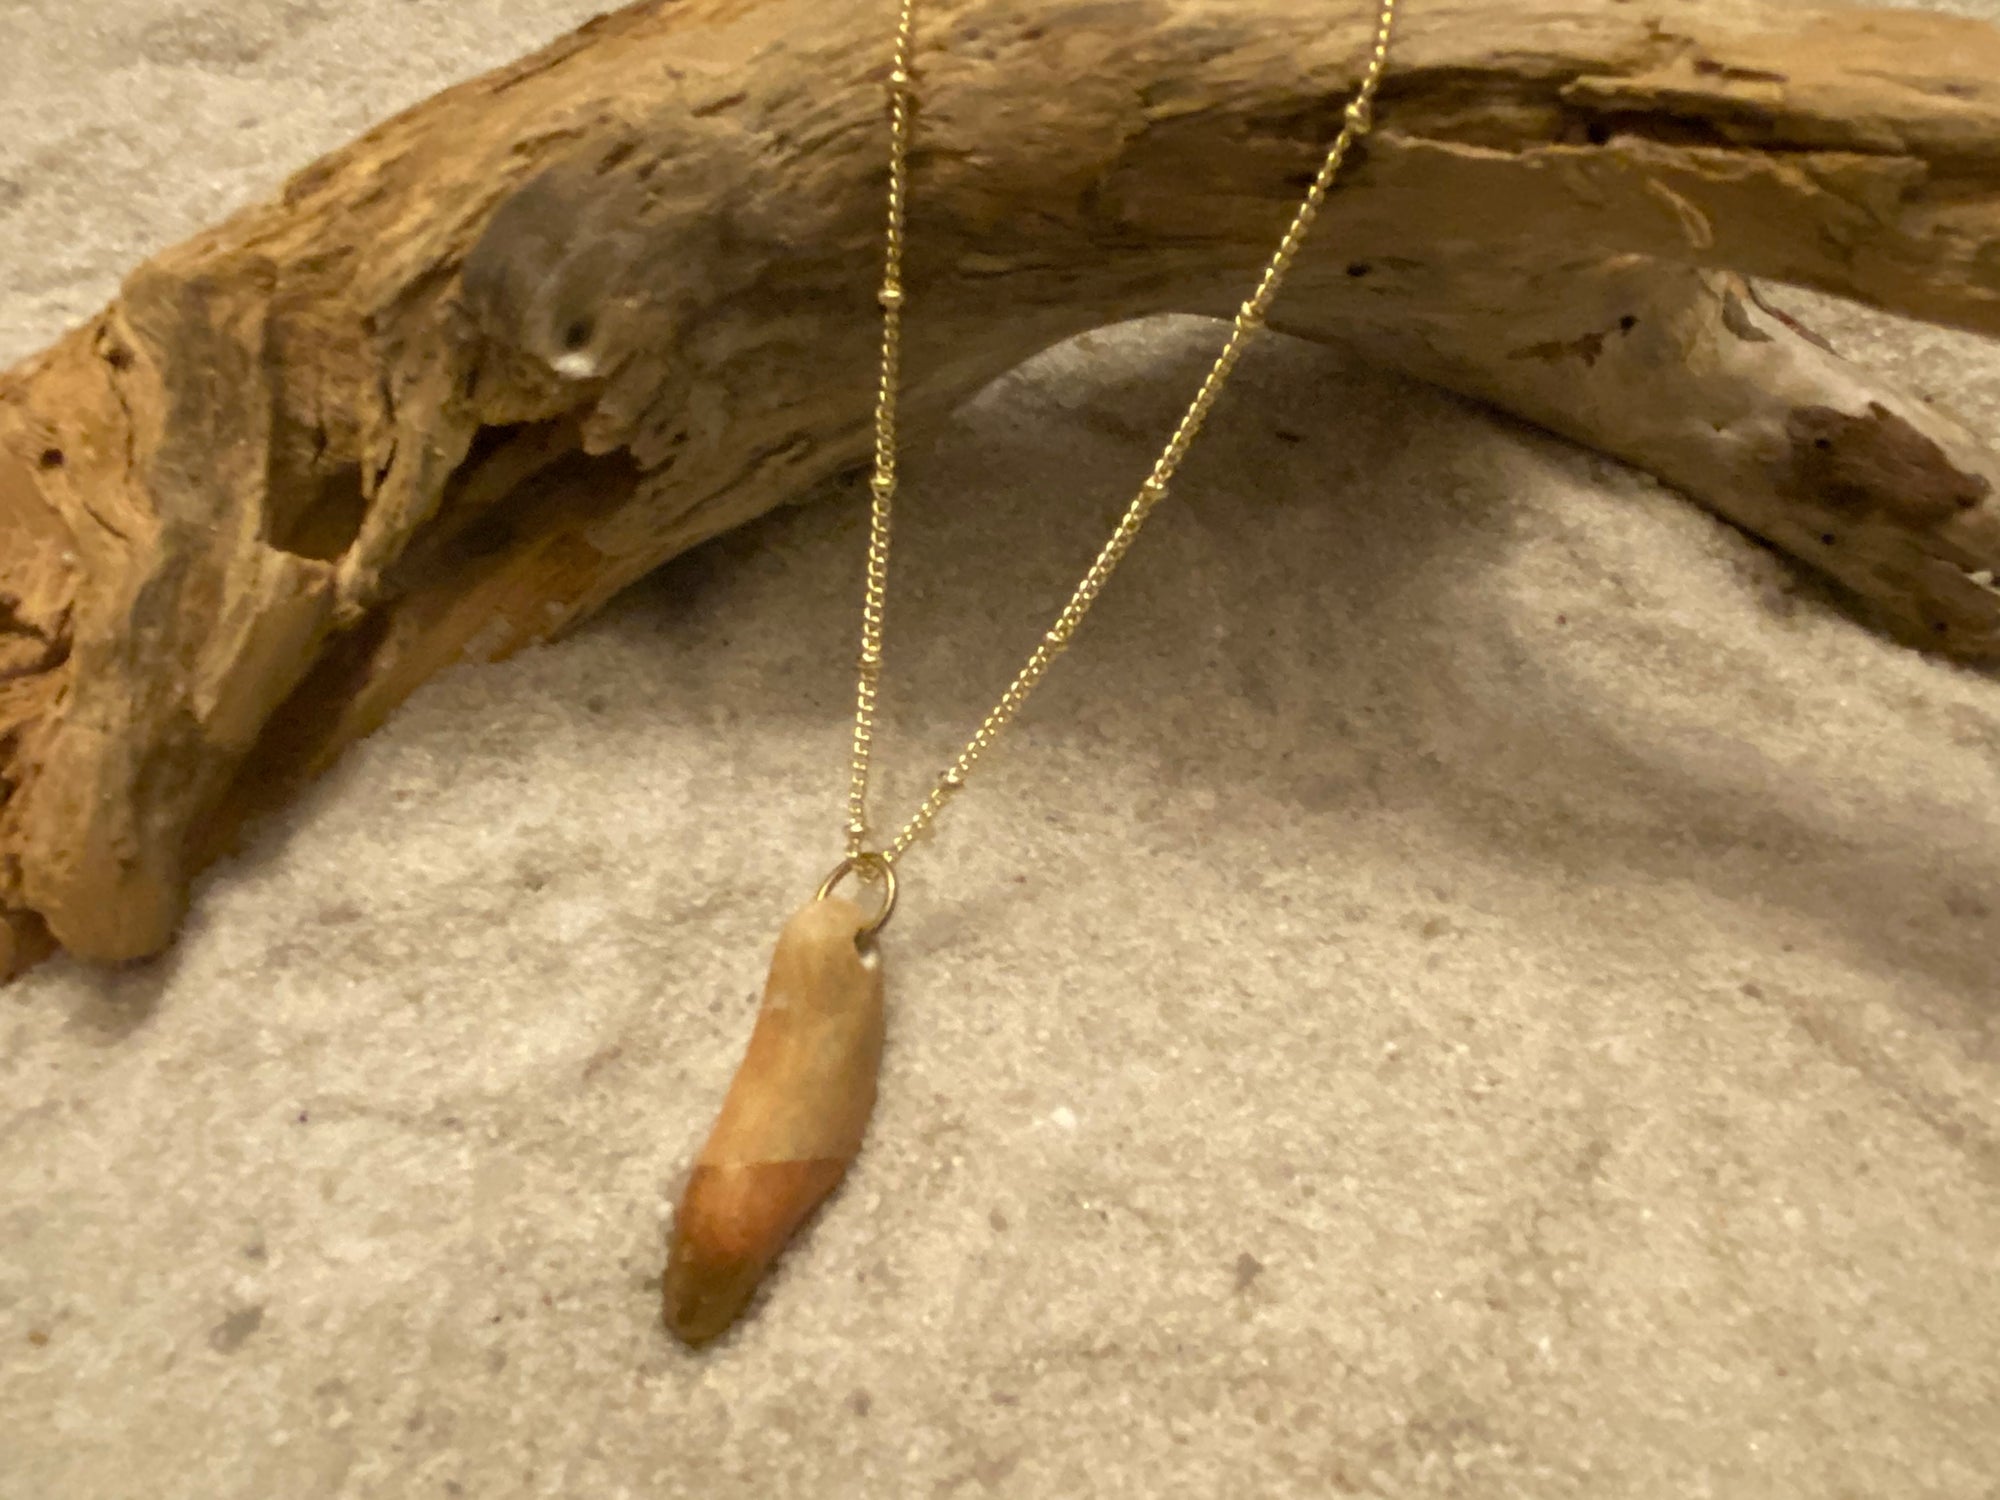 Haiti Beach Rock Necklace - Oblong Natural Stone Dipped in Gold Leaf on 30" Gold Ball Chain